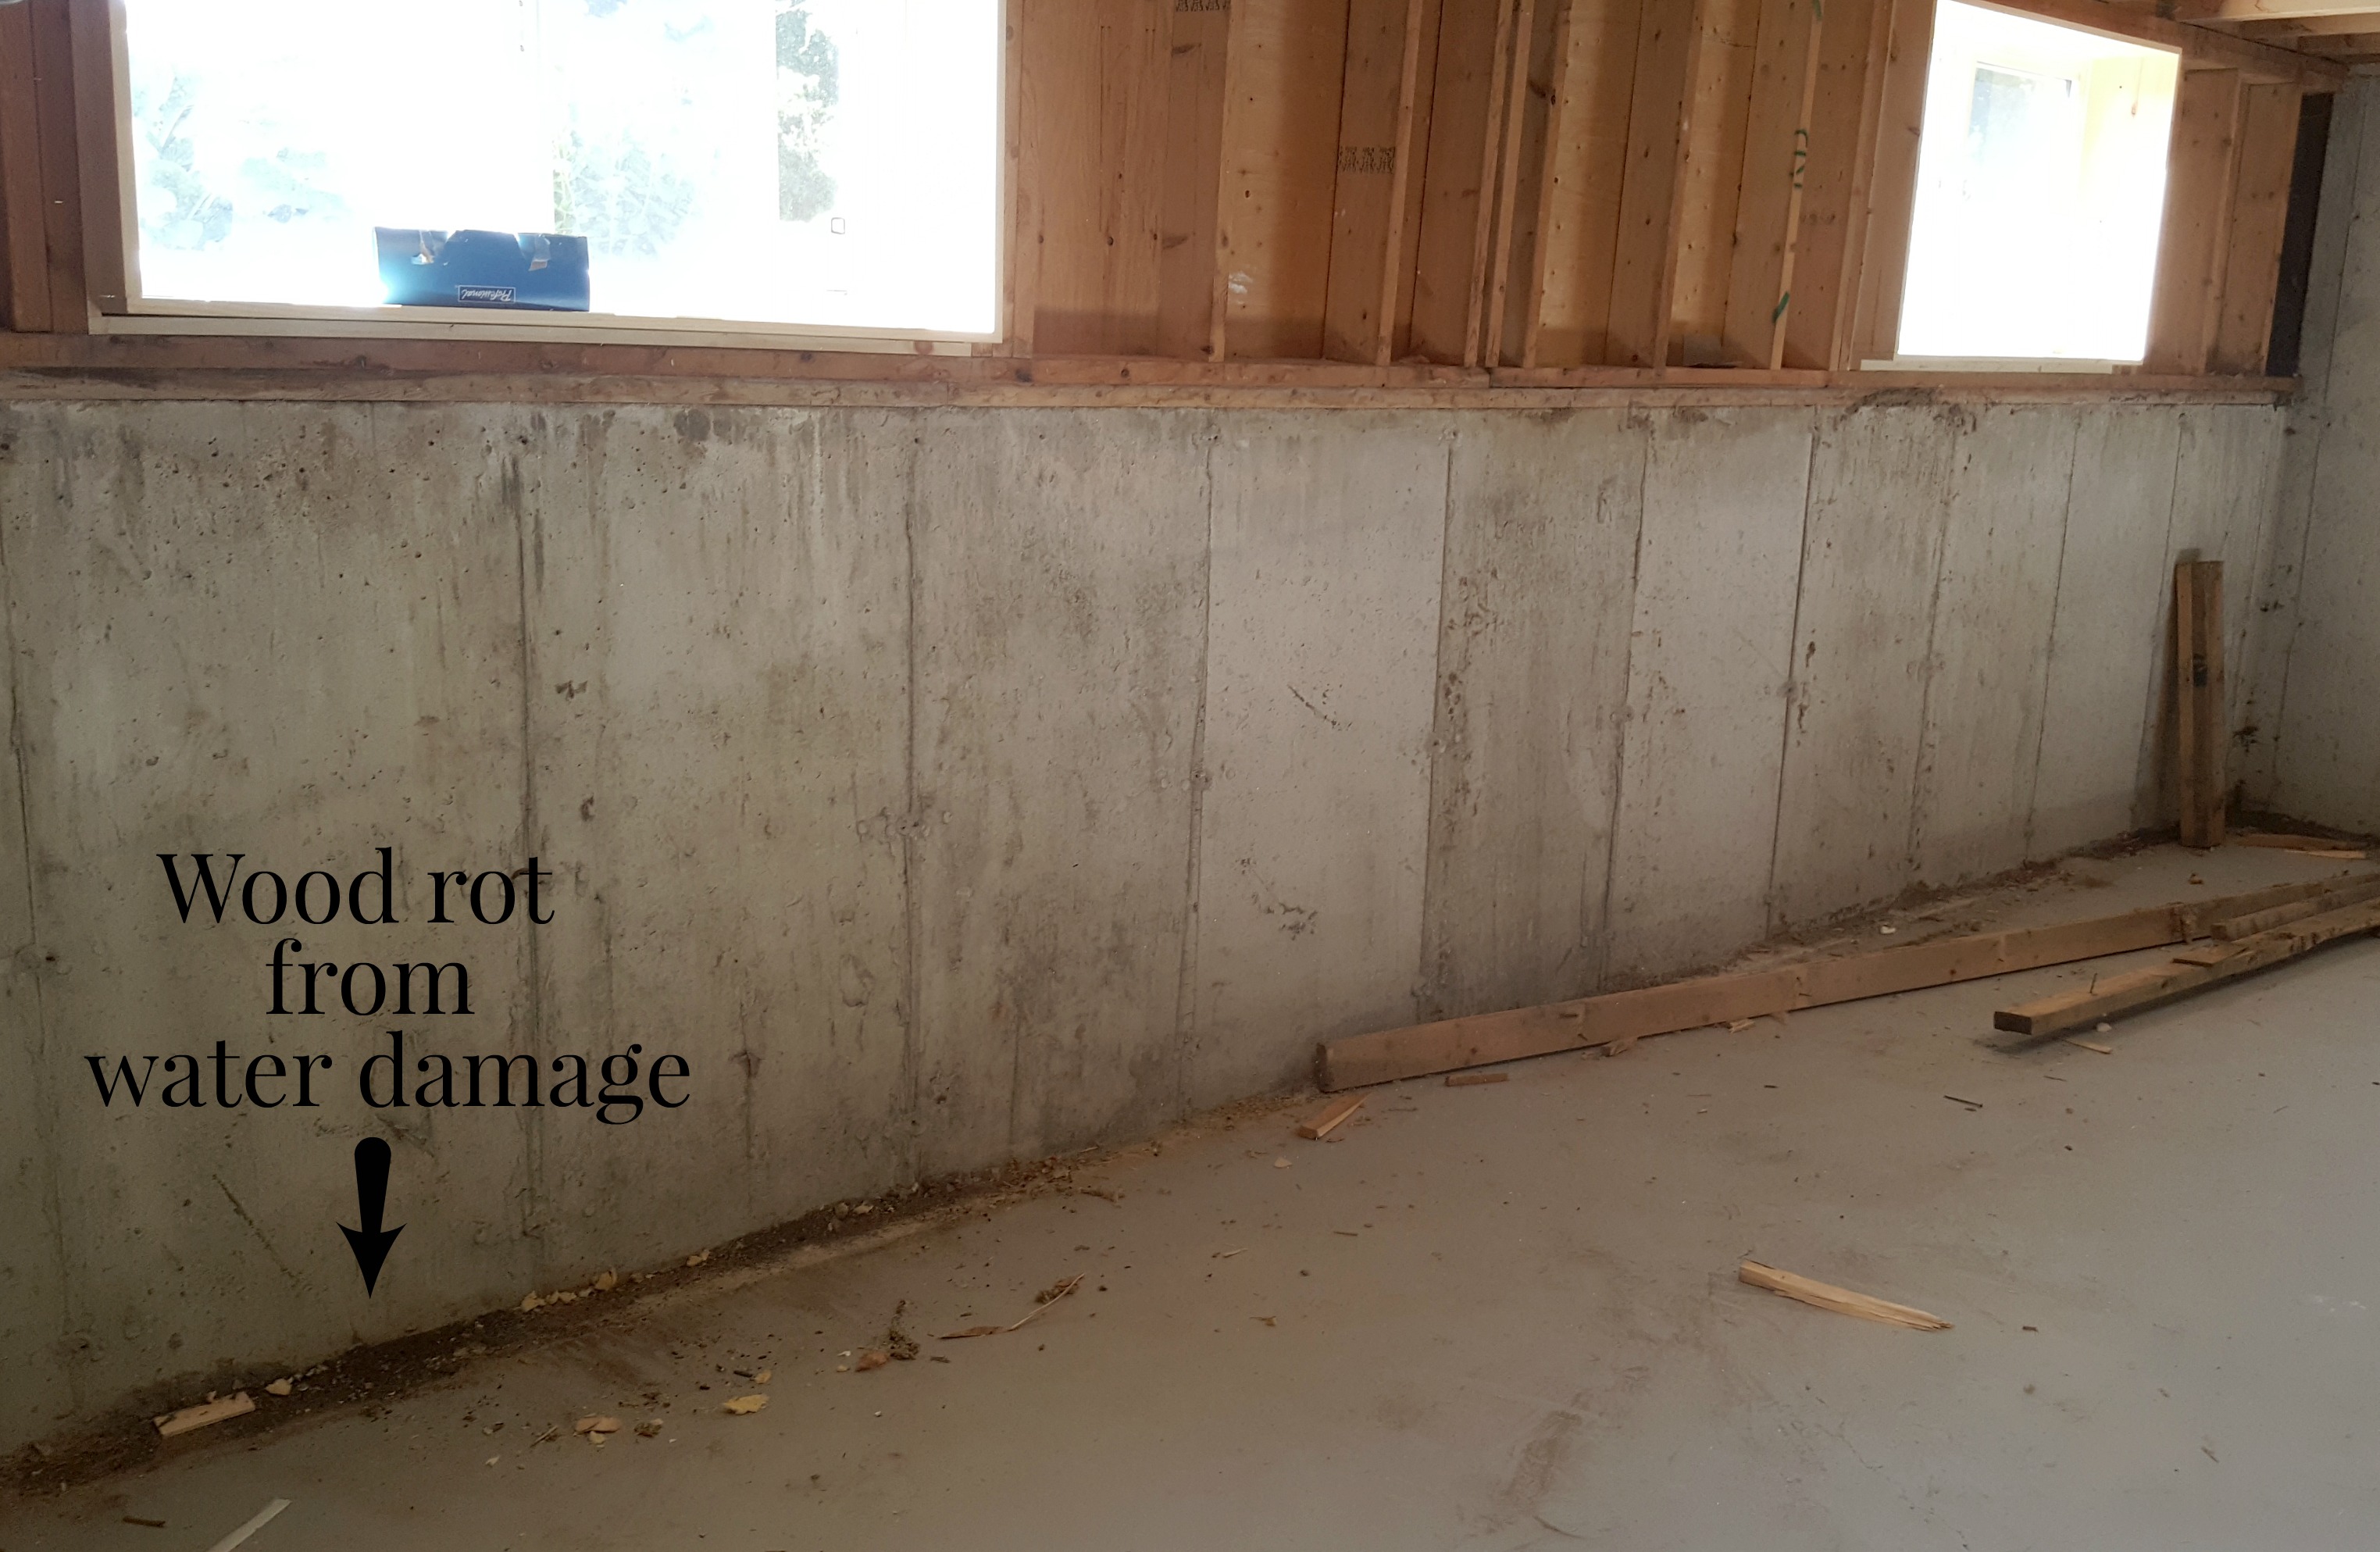 Turtles And Tails Basement Wall Framing Insulating